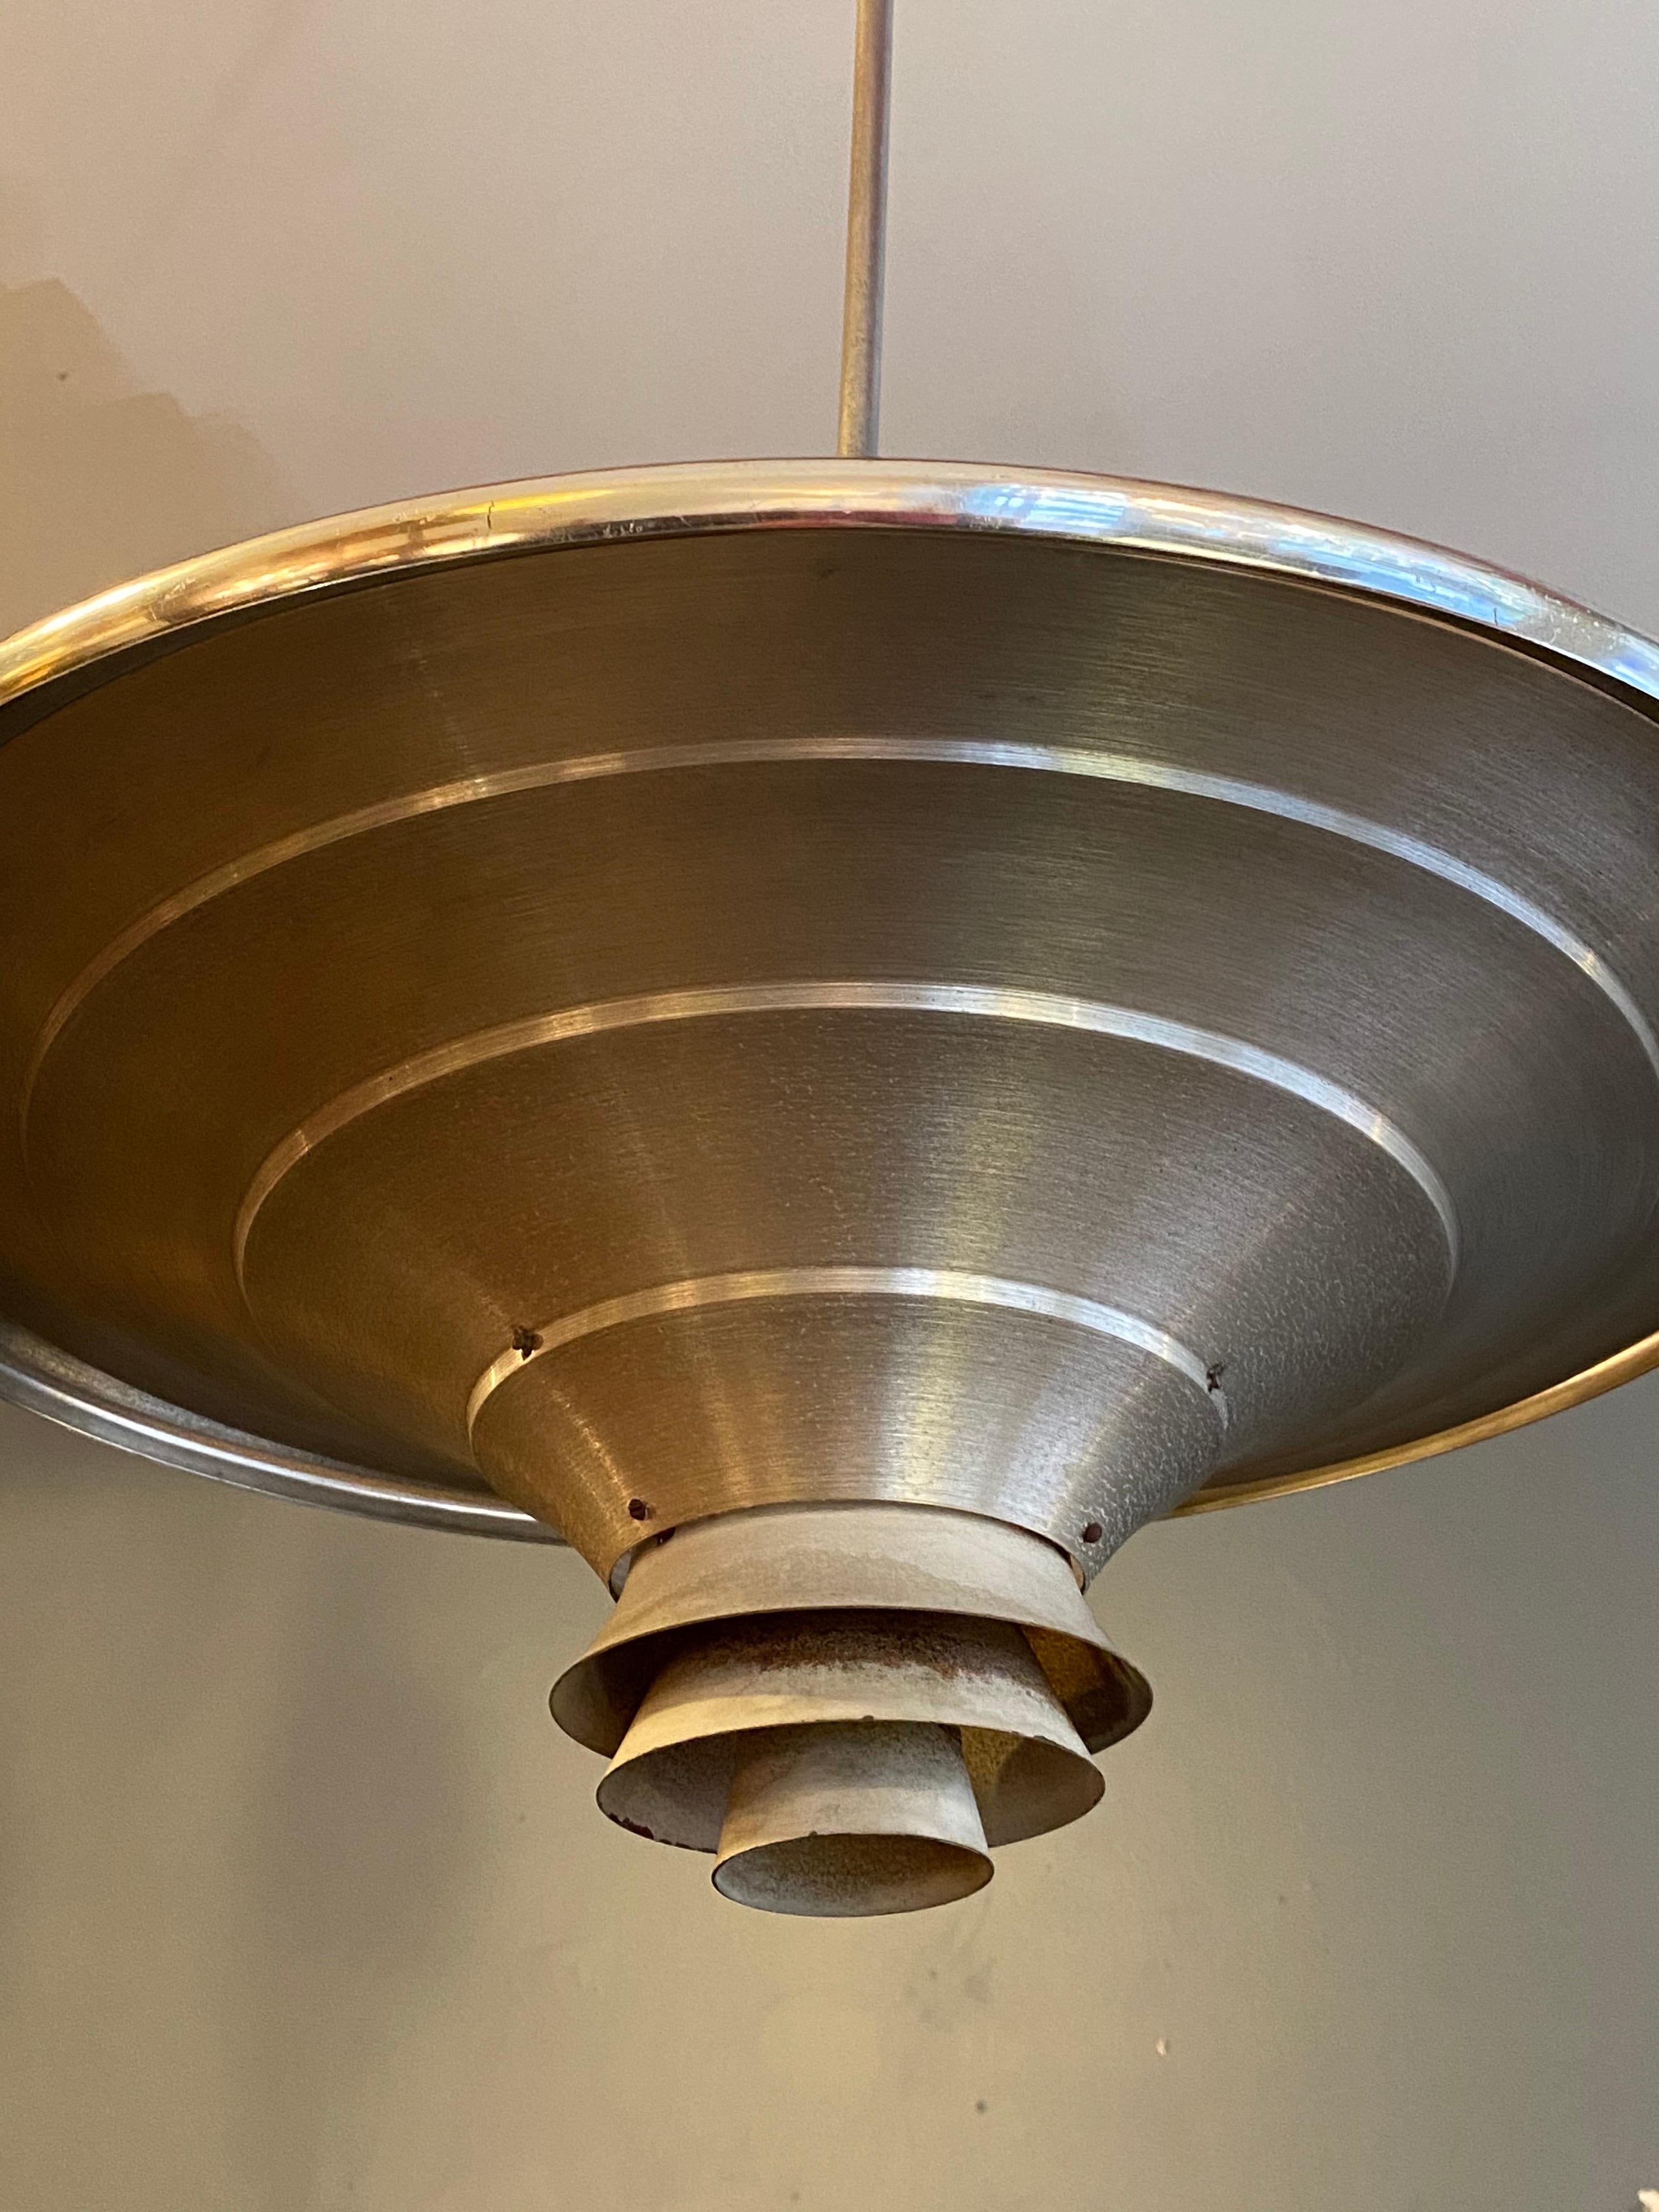 Machine Age hanging light fixture, produced in Chicago. Classic louvered design, aluminum construction.